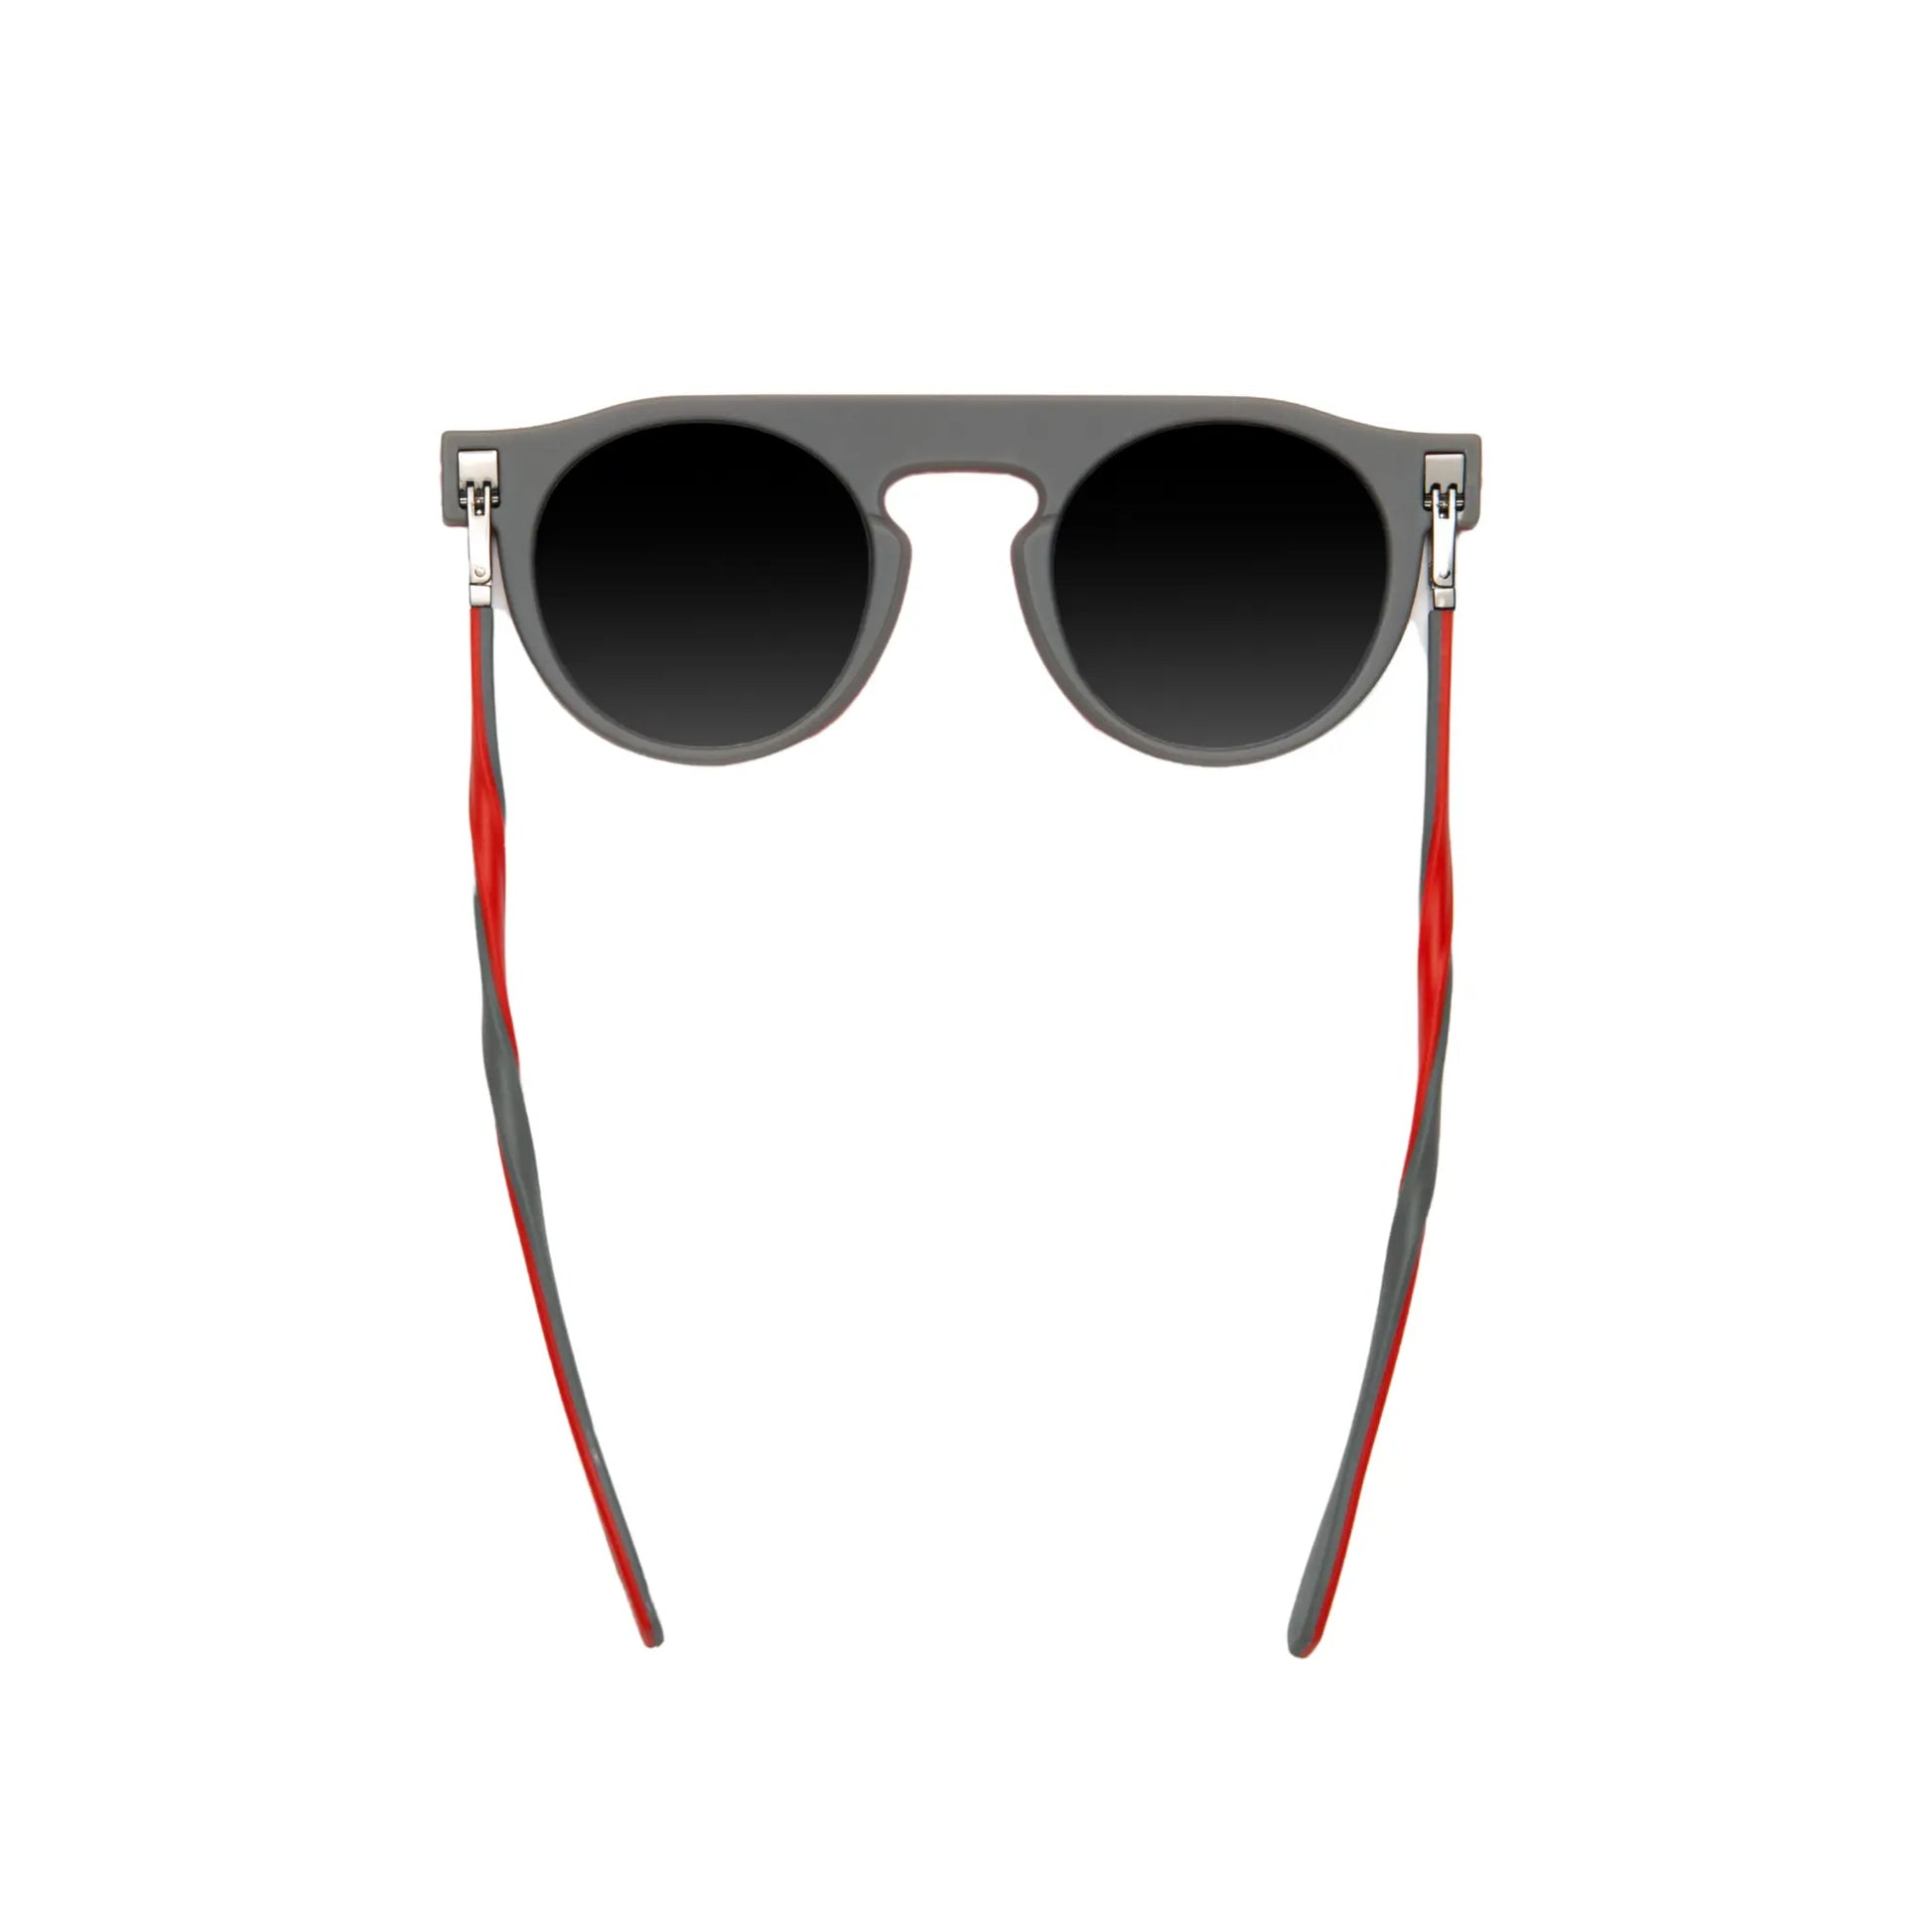 Reverso sunglasses grey & red reversible & ultra light top view